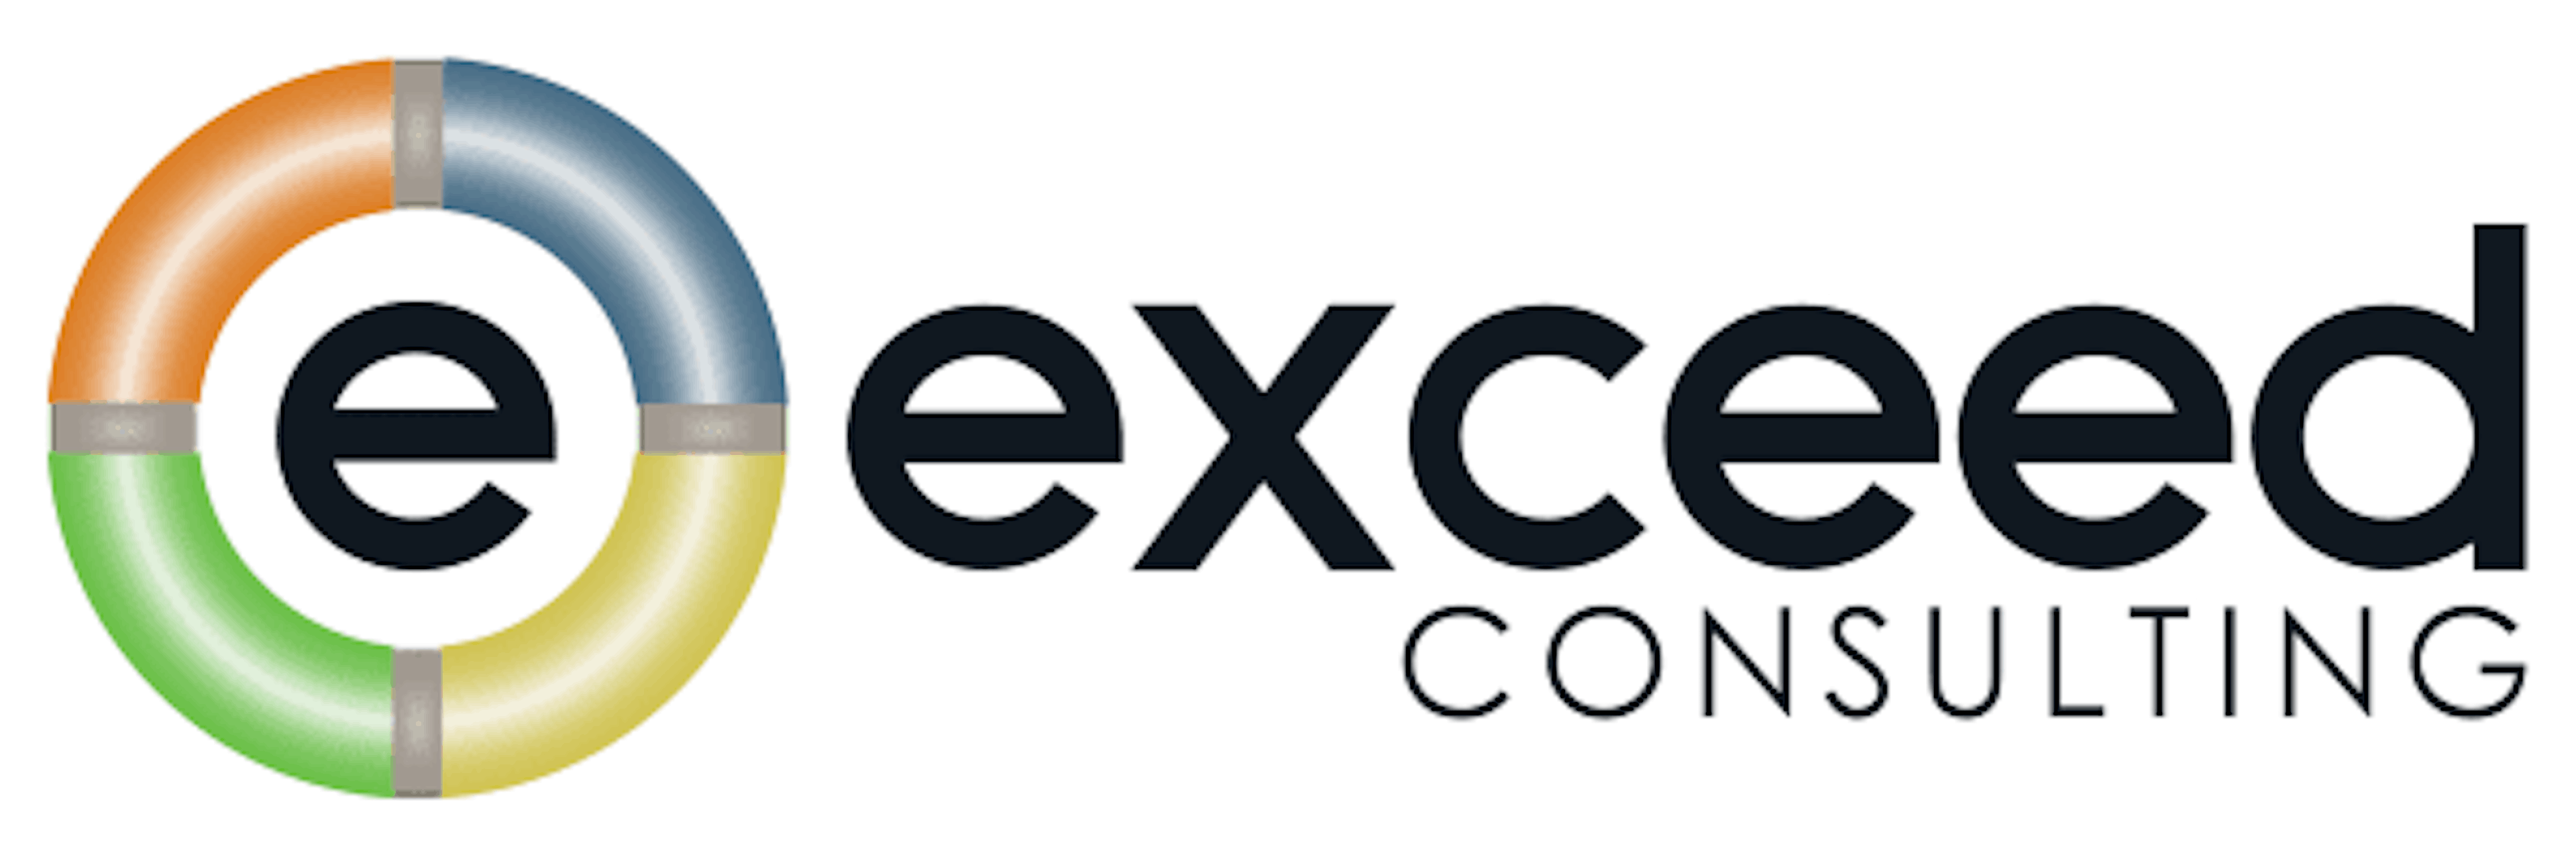 Exceed-corp.com